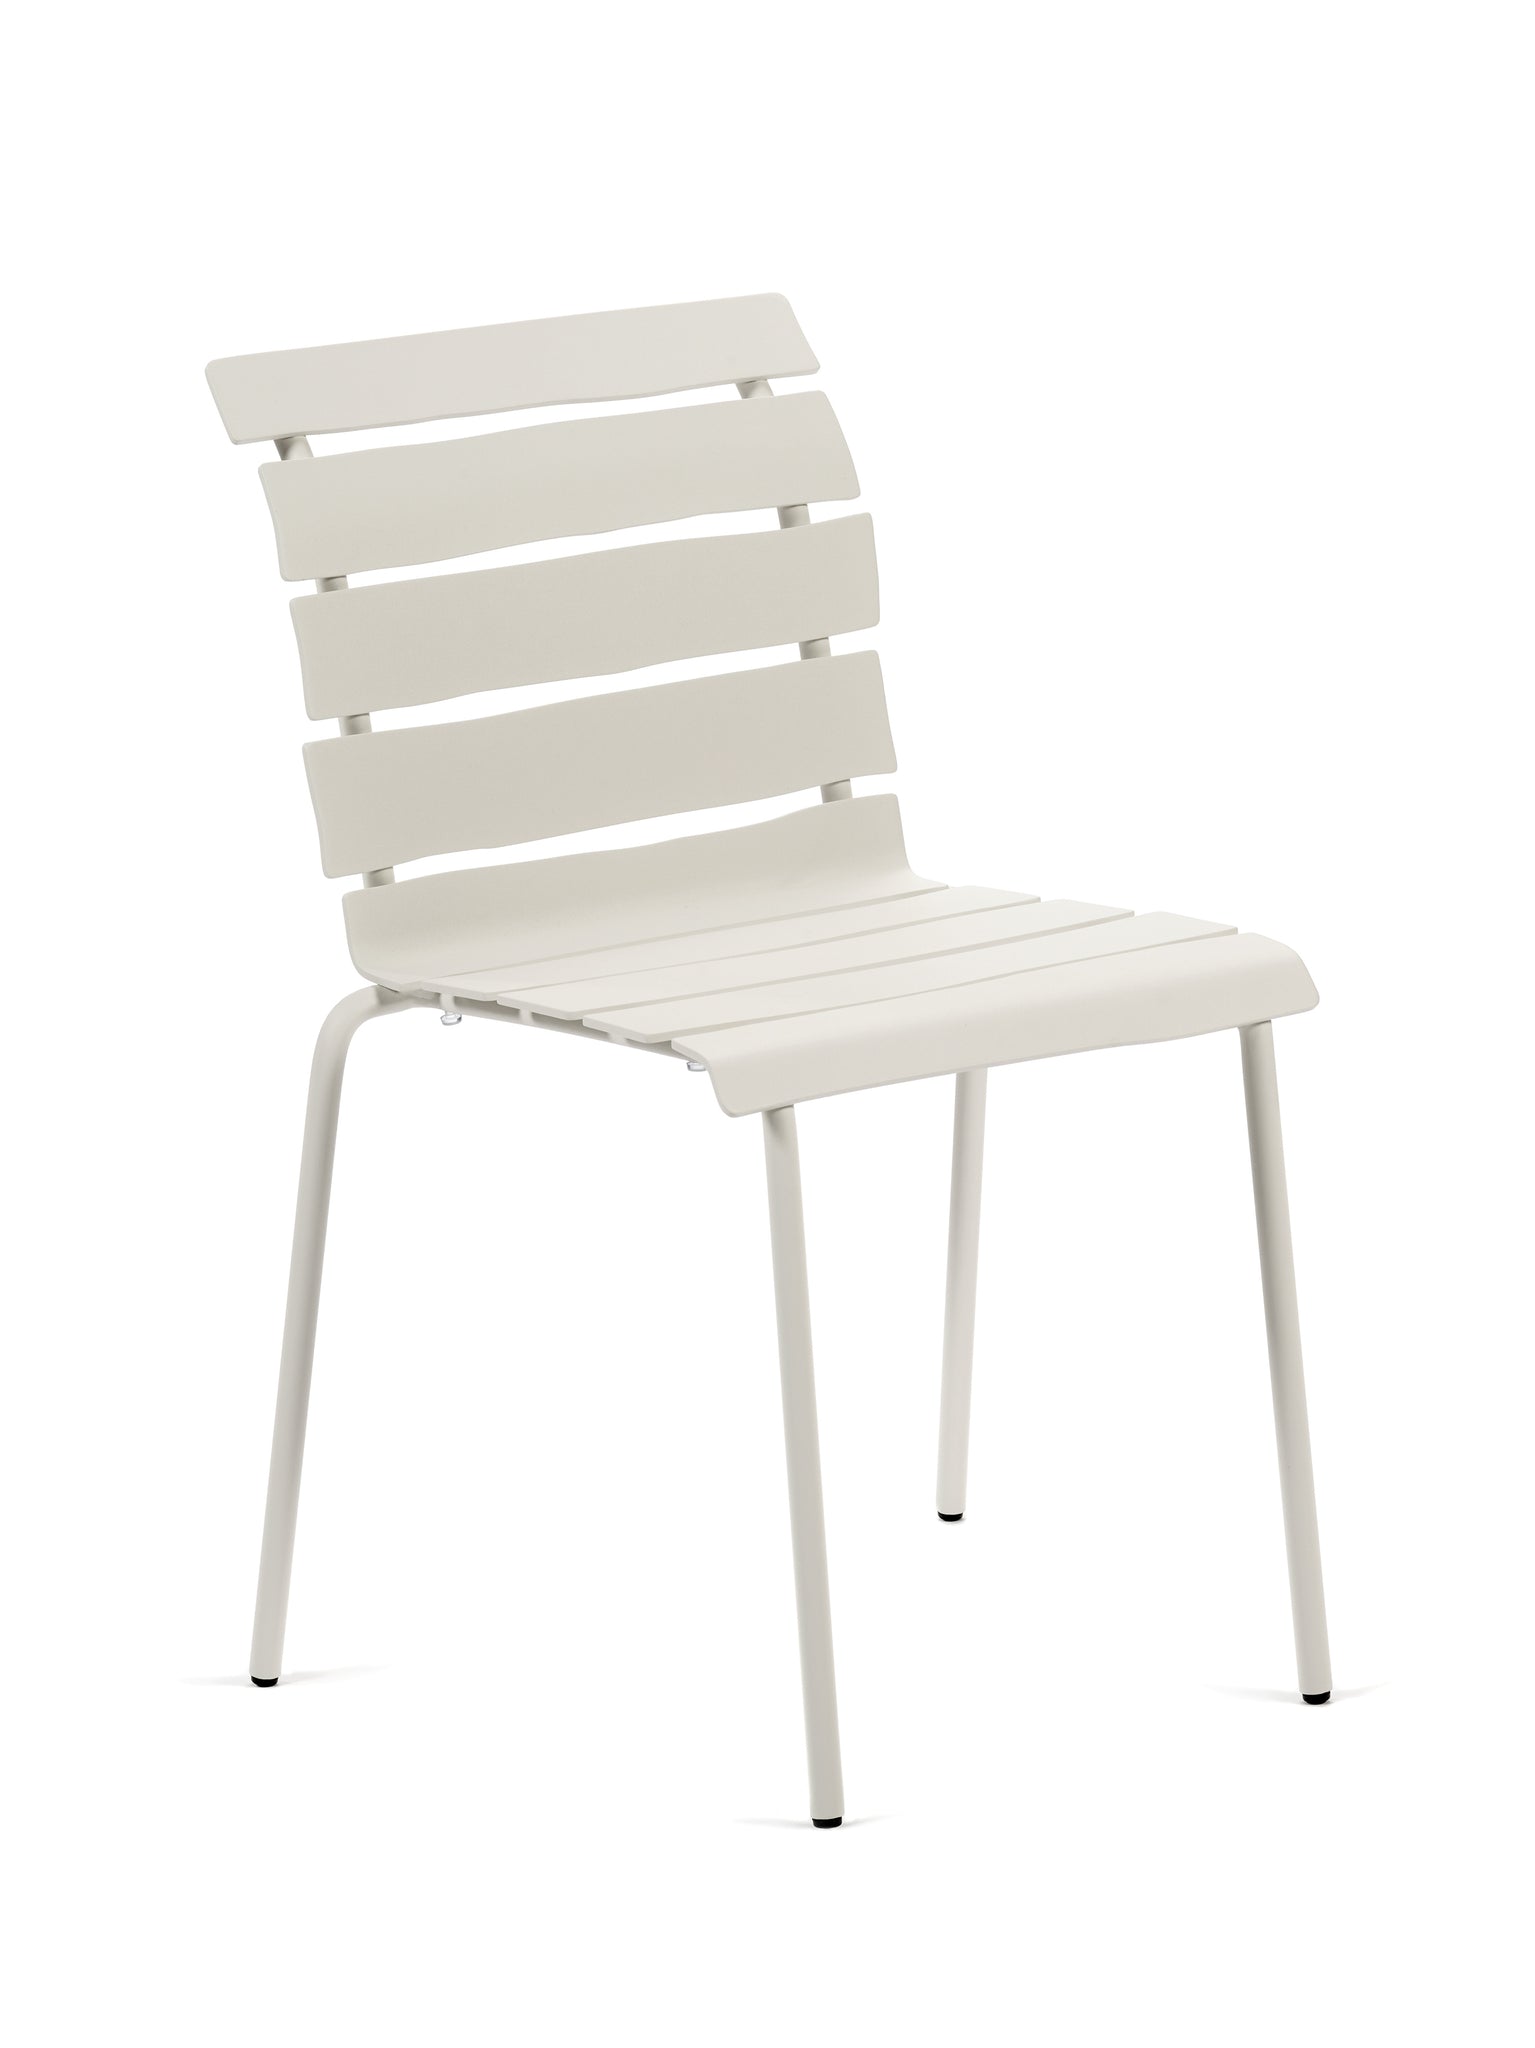 Aligned Outdoor Chair without Armrests